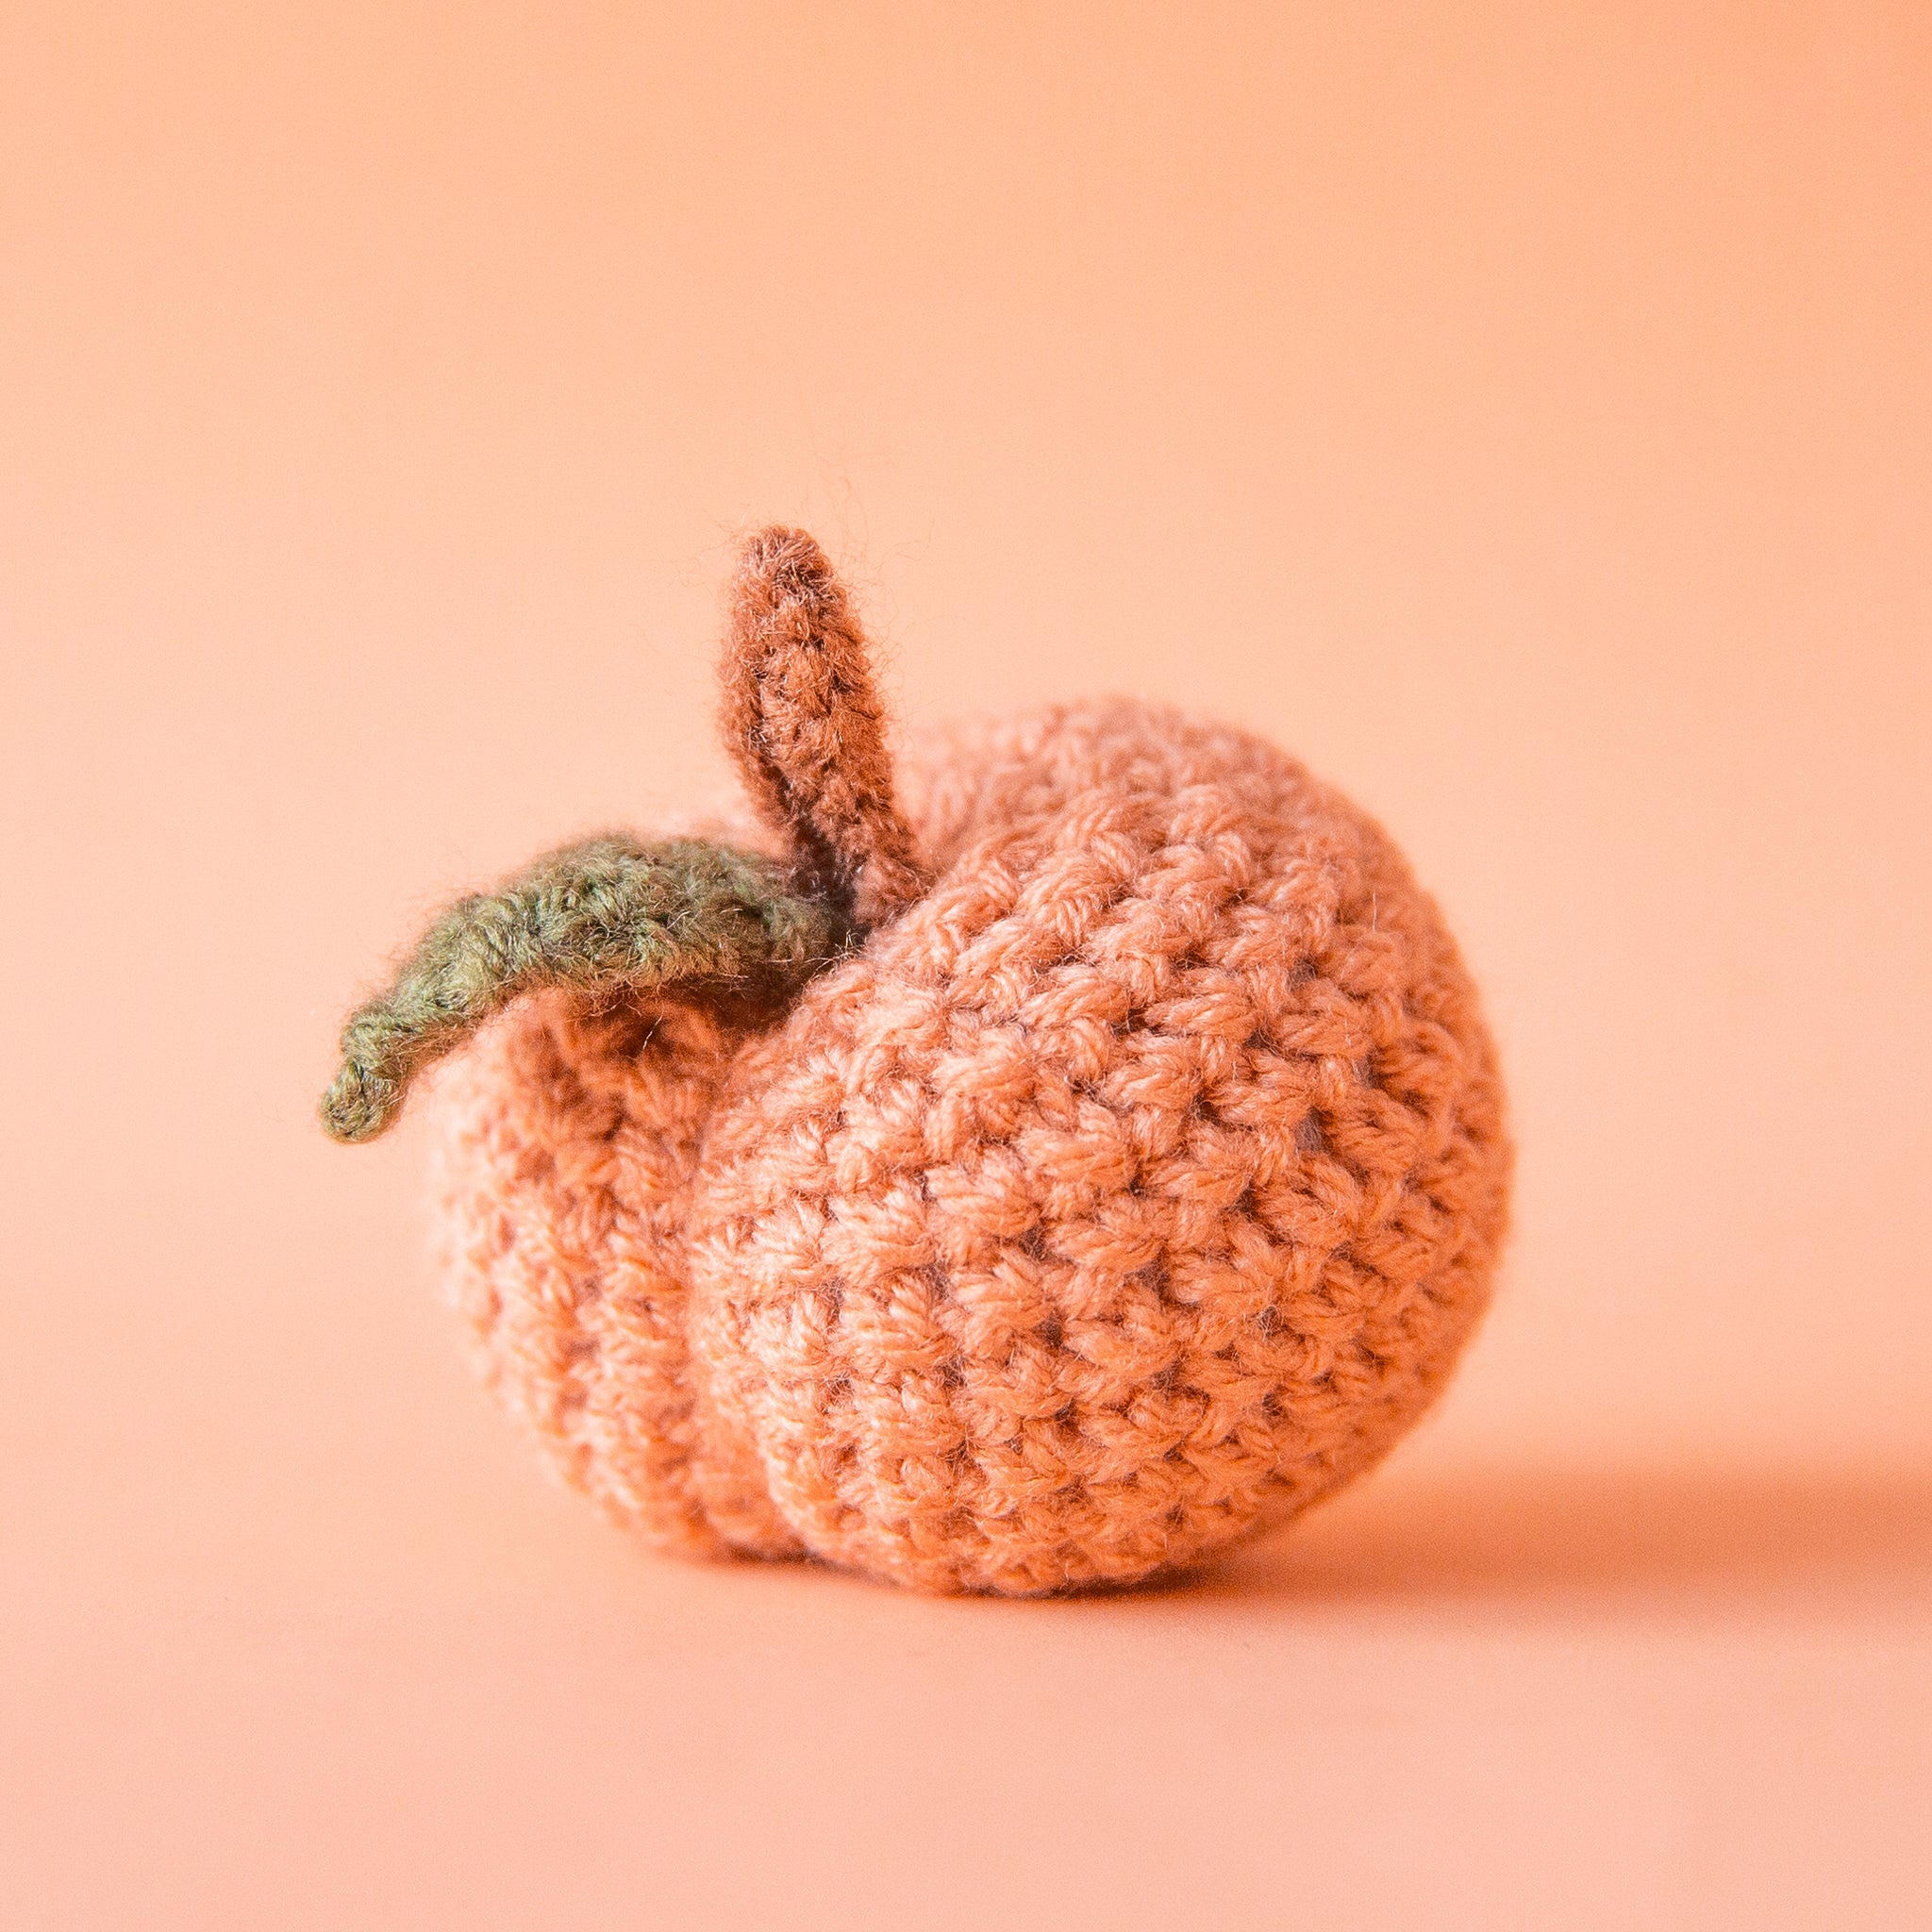 On a peachy background is a knitted peach shaped toy.